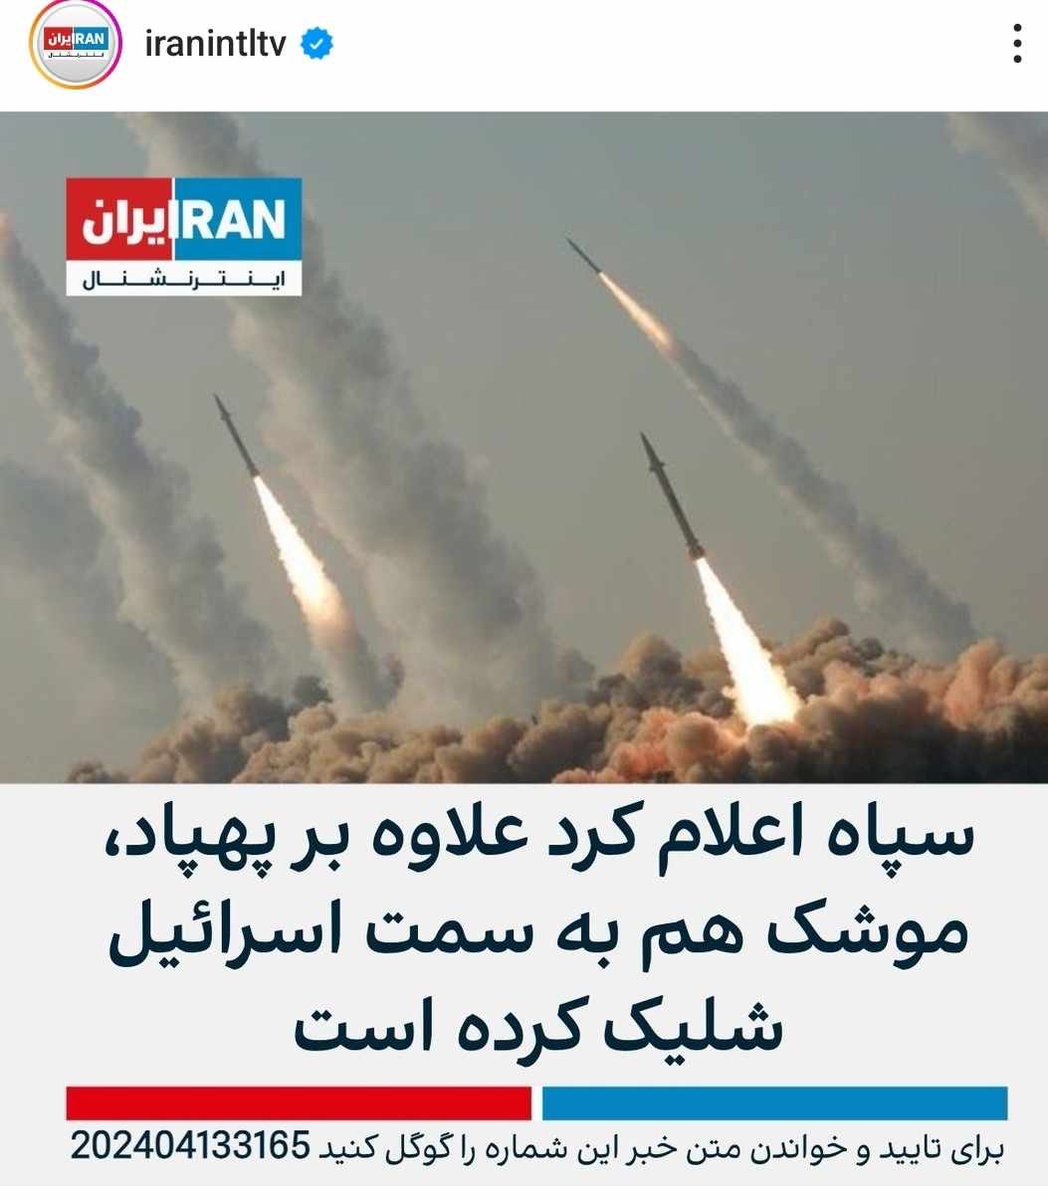 🚨Missiles on their way to Israel. The Islamic Republic of Iran attacks directly from Iran. The missiles will come from the Iranian city of Hamadan. In addition, there are attacks from the proxies in Syria, Yemen and Iraq. #israelunderattack #Israel #Iran #StandWithIsrael…